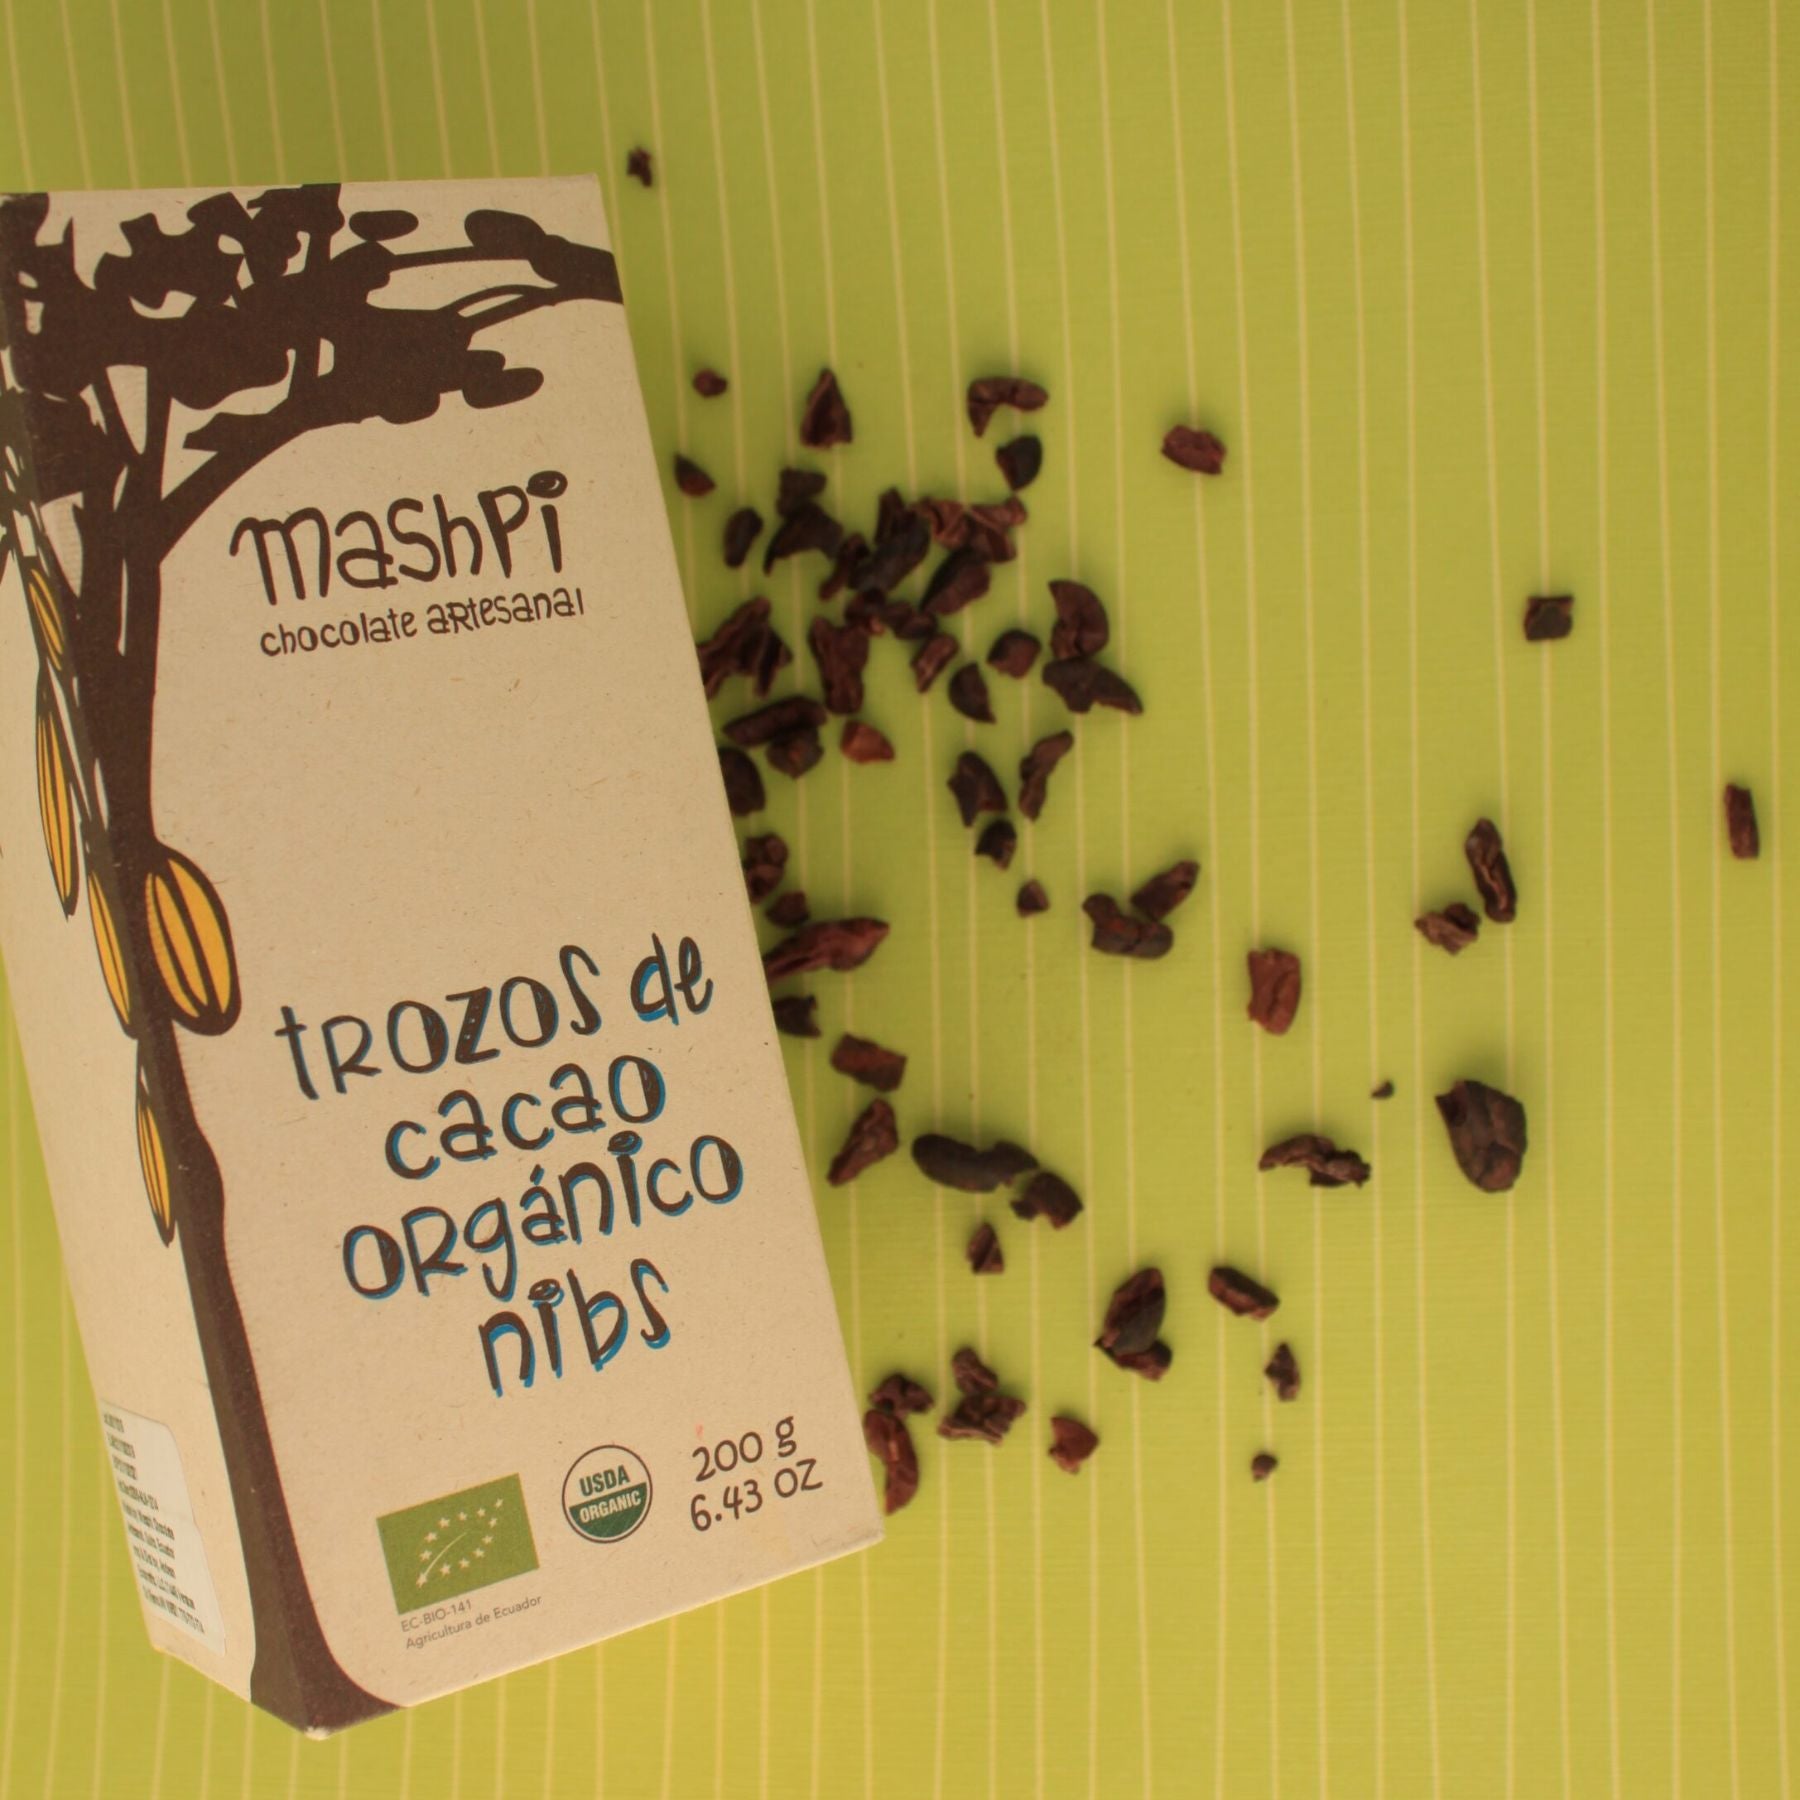 Box of Mashpi Chocolate Artesenal Organic Cacao Nibs with cacao nibs sprinkled across a green striped background.